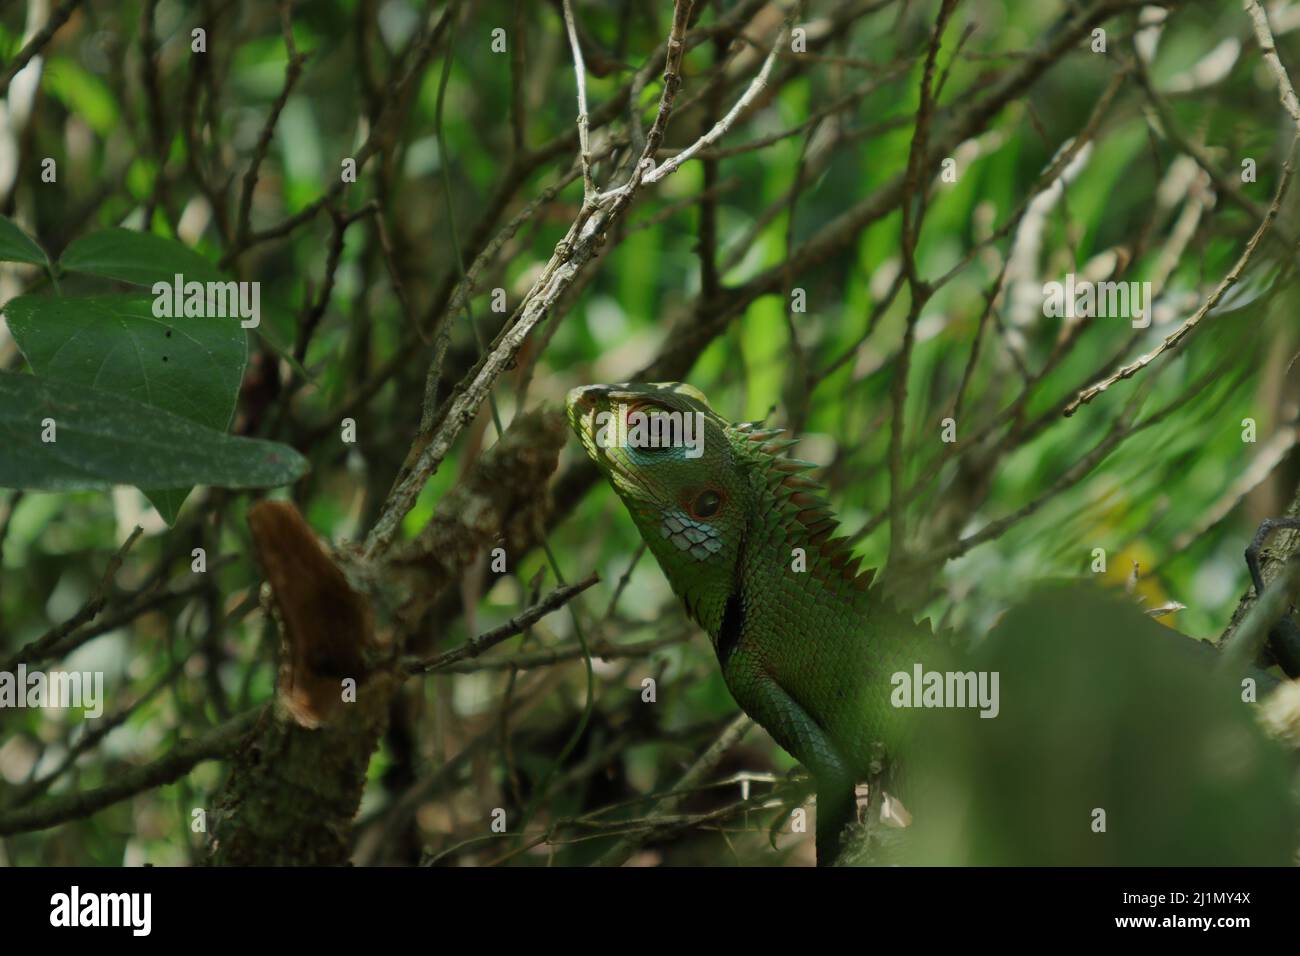 Head and upper parts of a common green forest lizard hiding between tree twigs. Lizard is staring at the camera Stock Photo